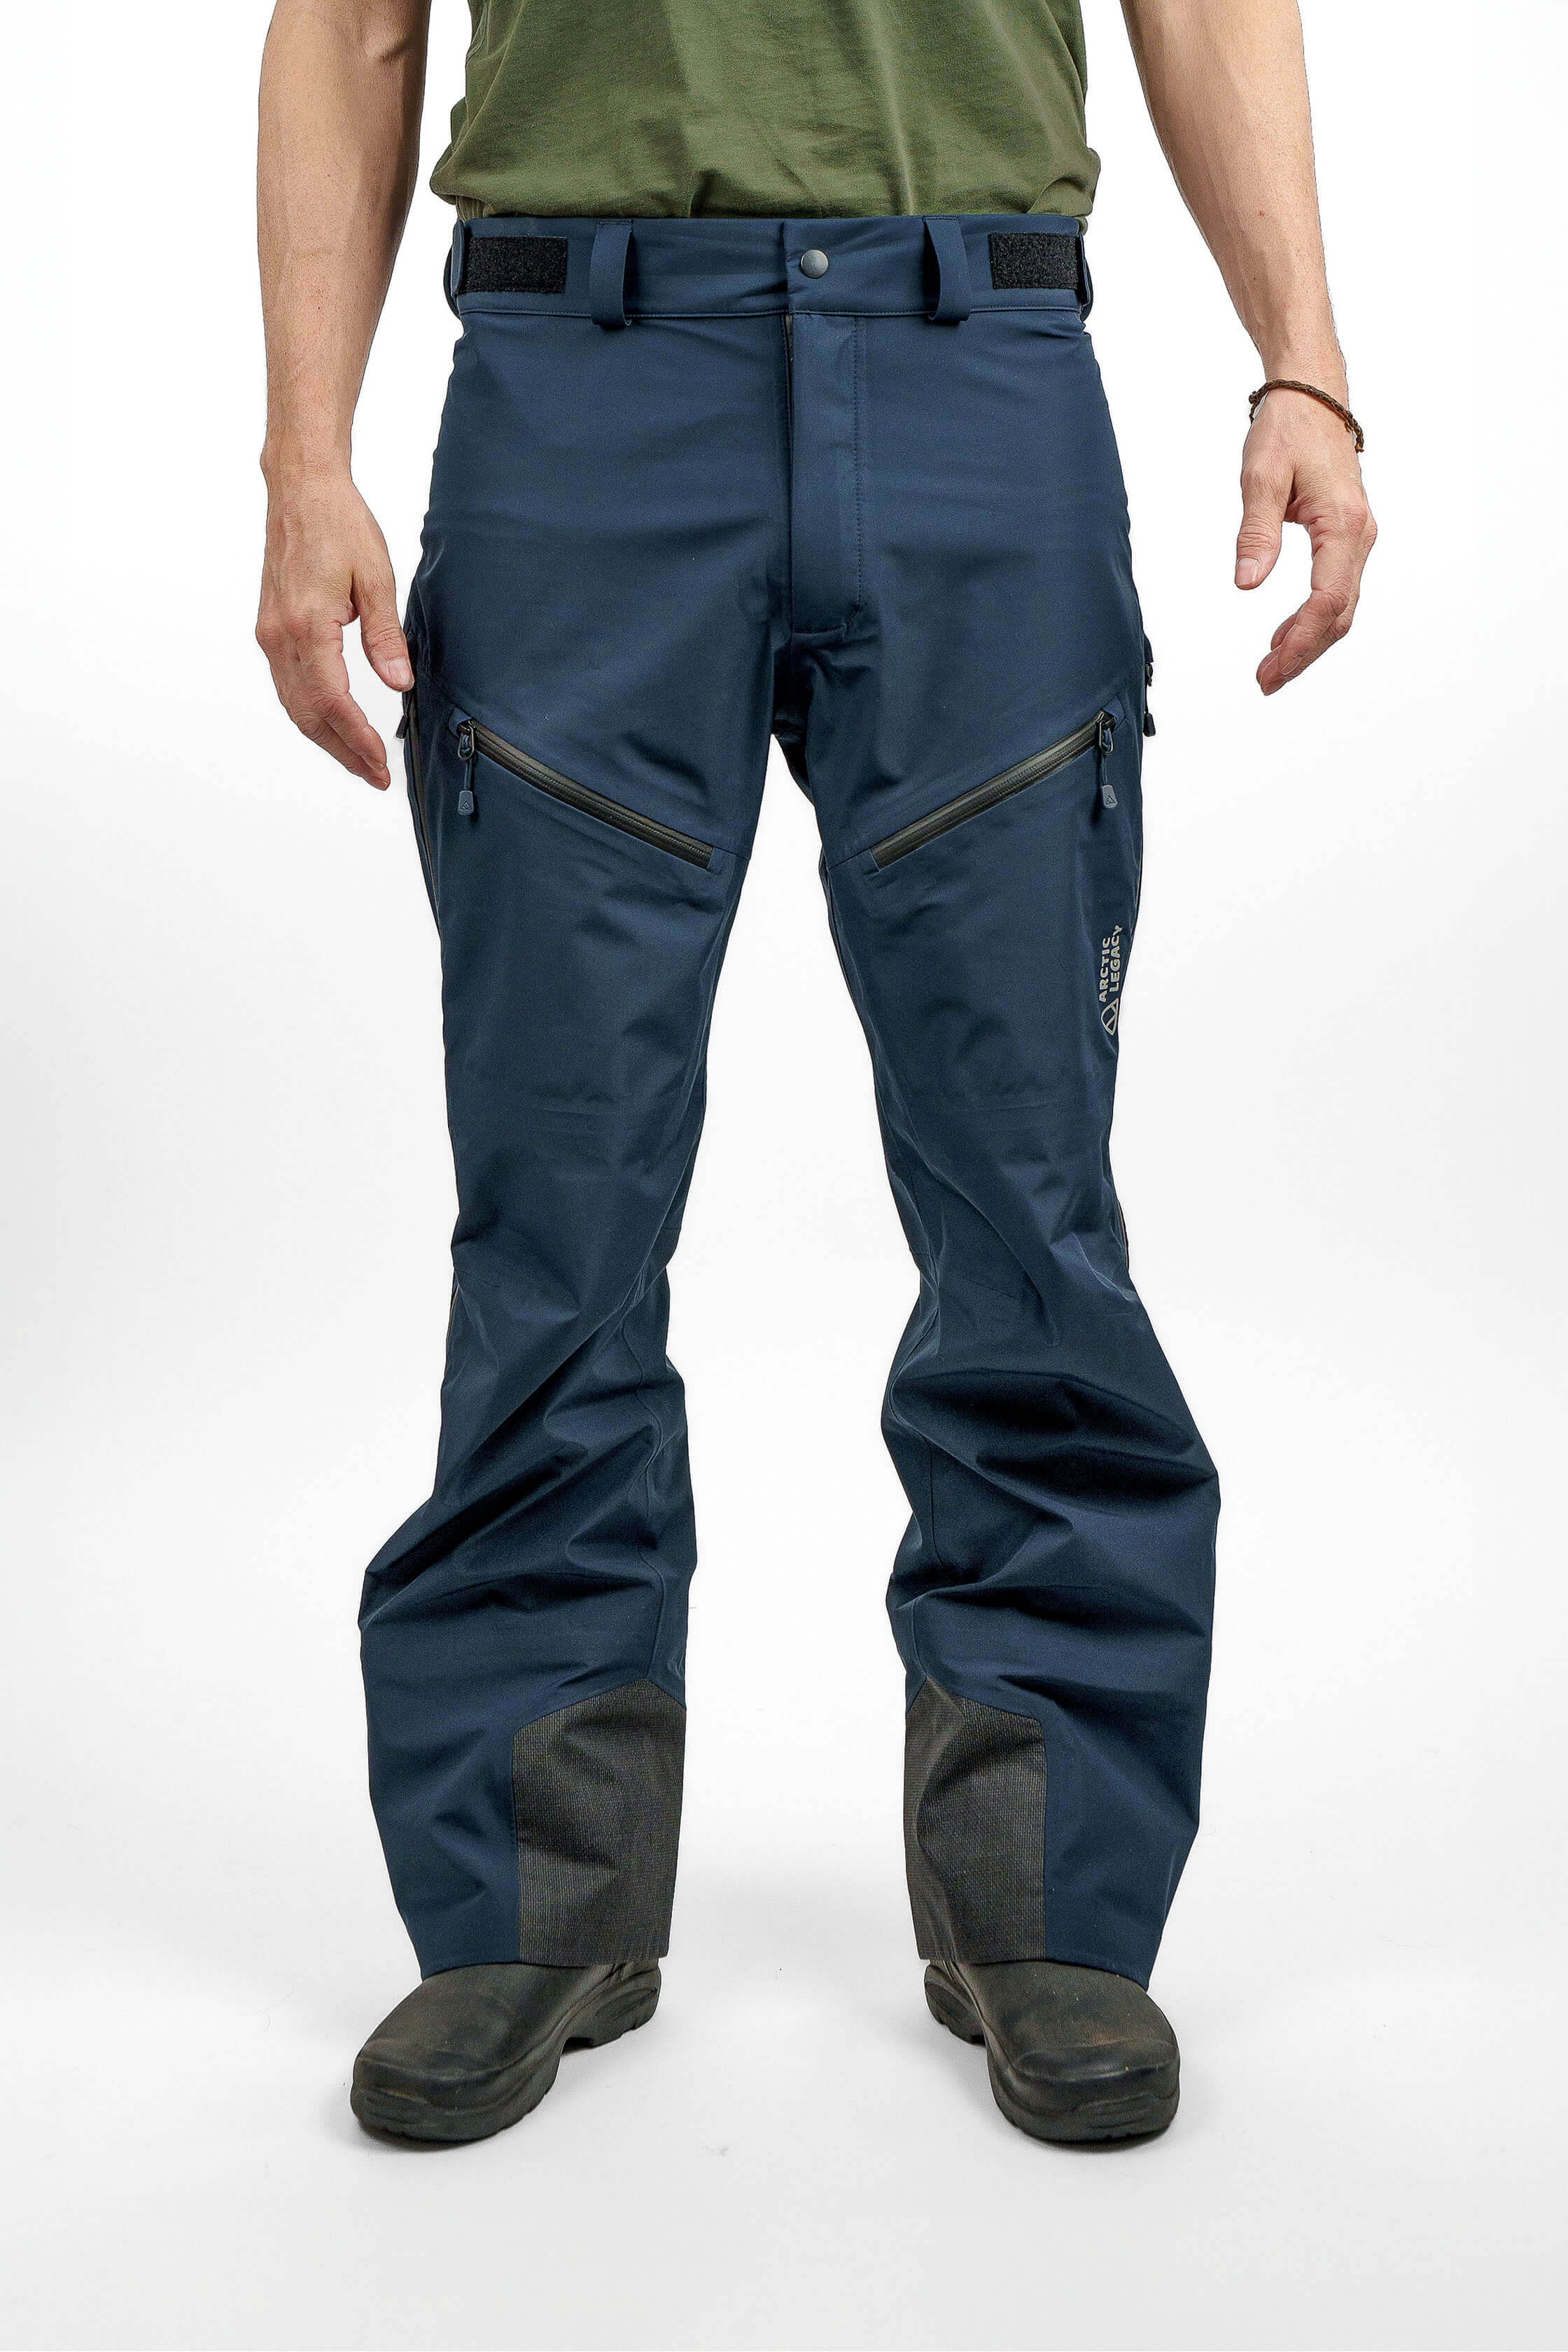 Blue hardshell pants in unisex sizing - front view of the Arctic Legacy Nuka Elements 3 layer Pants#color_total-eclipse